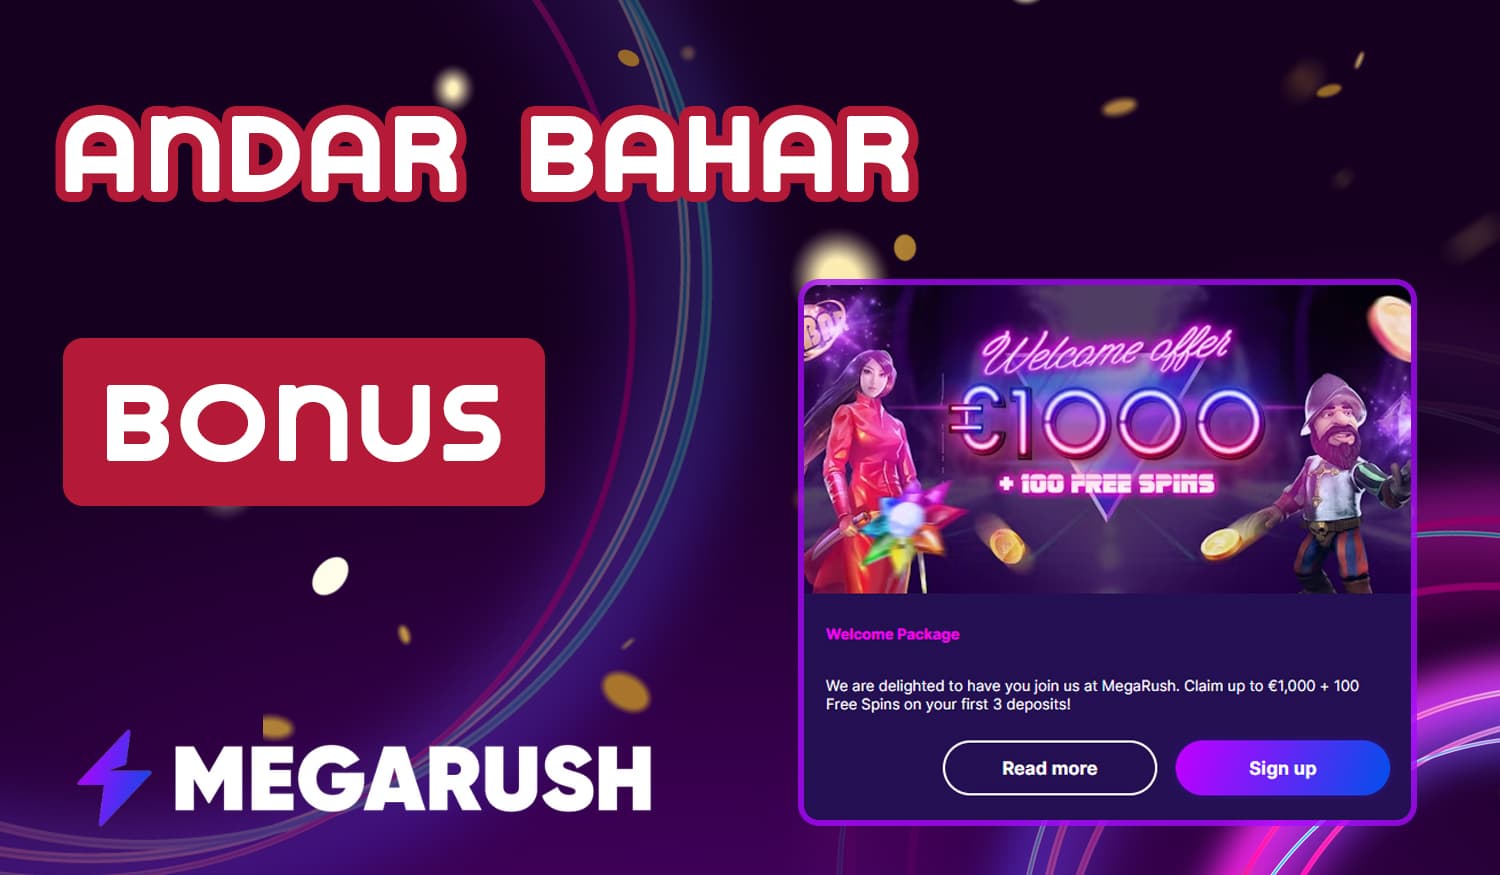 How to get and use Megarush bonuses playing andar bahar